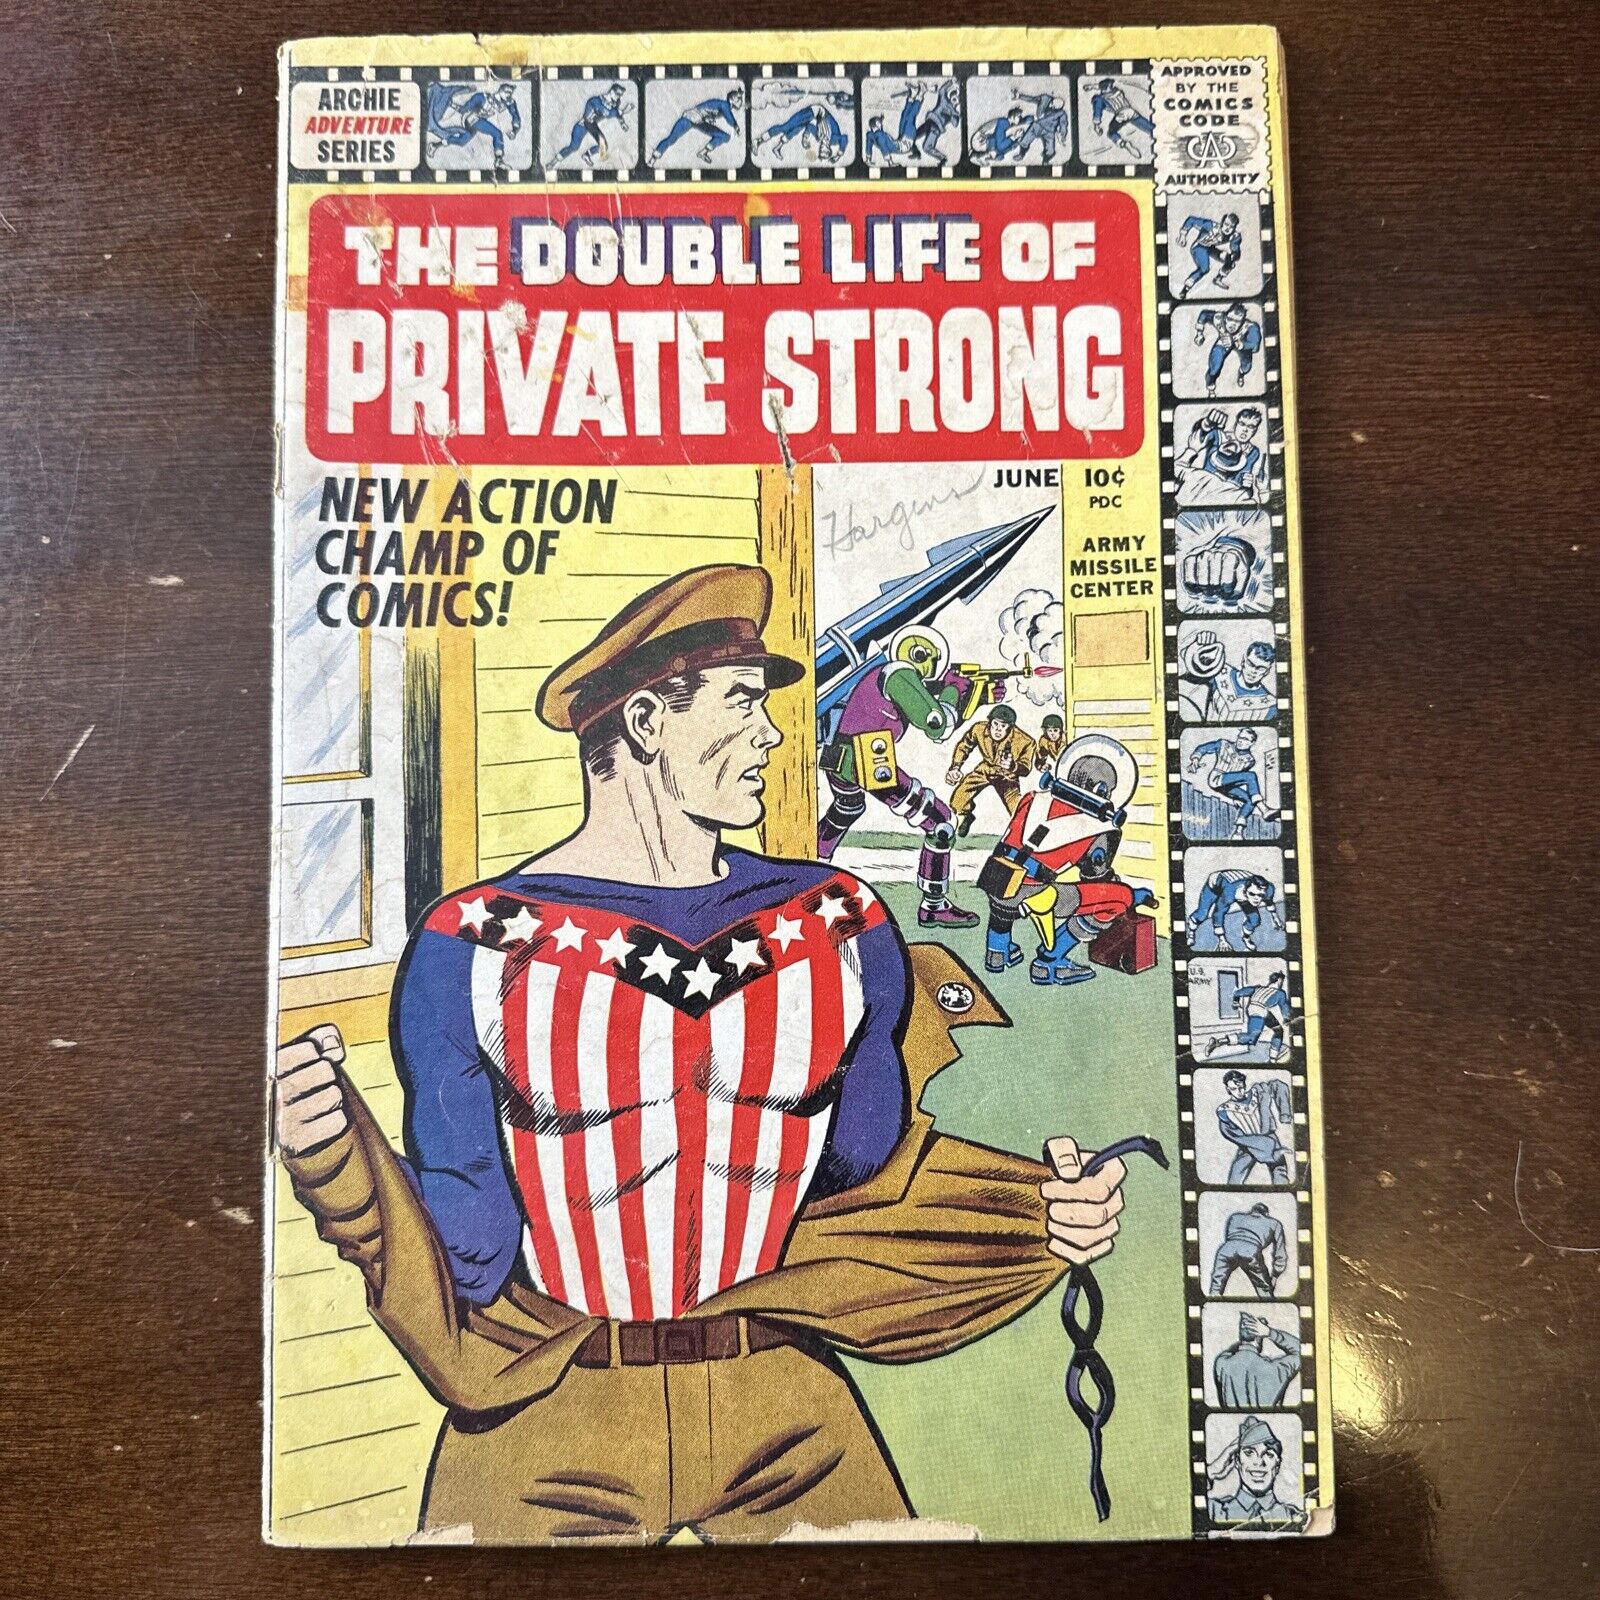 Double Life of Private Strong #1 (1959) - Simon and Kirby